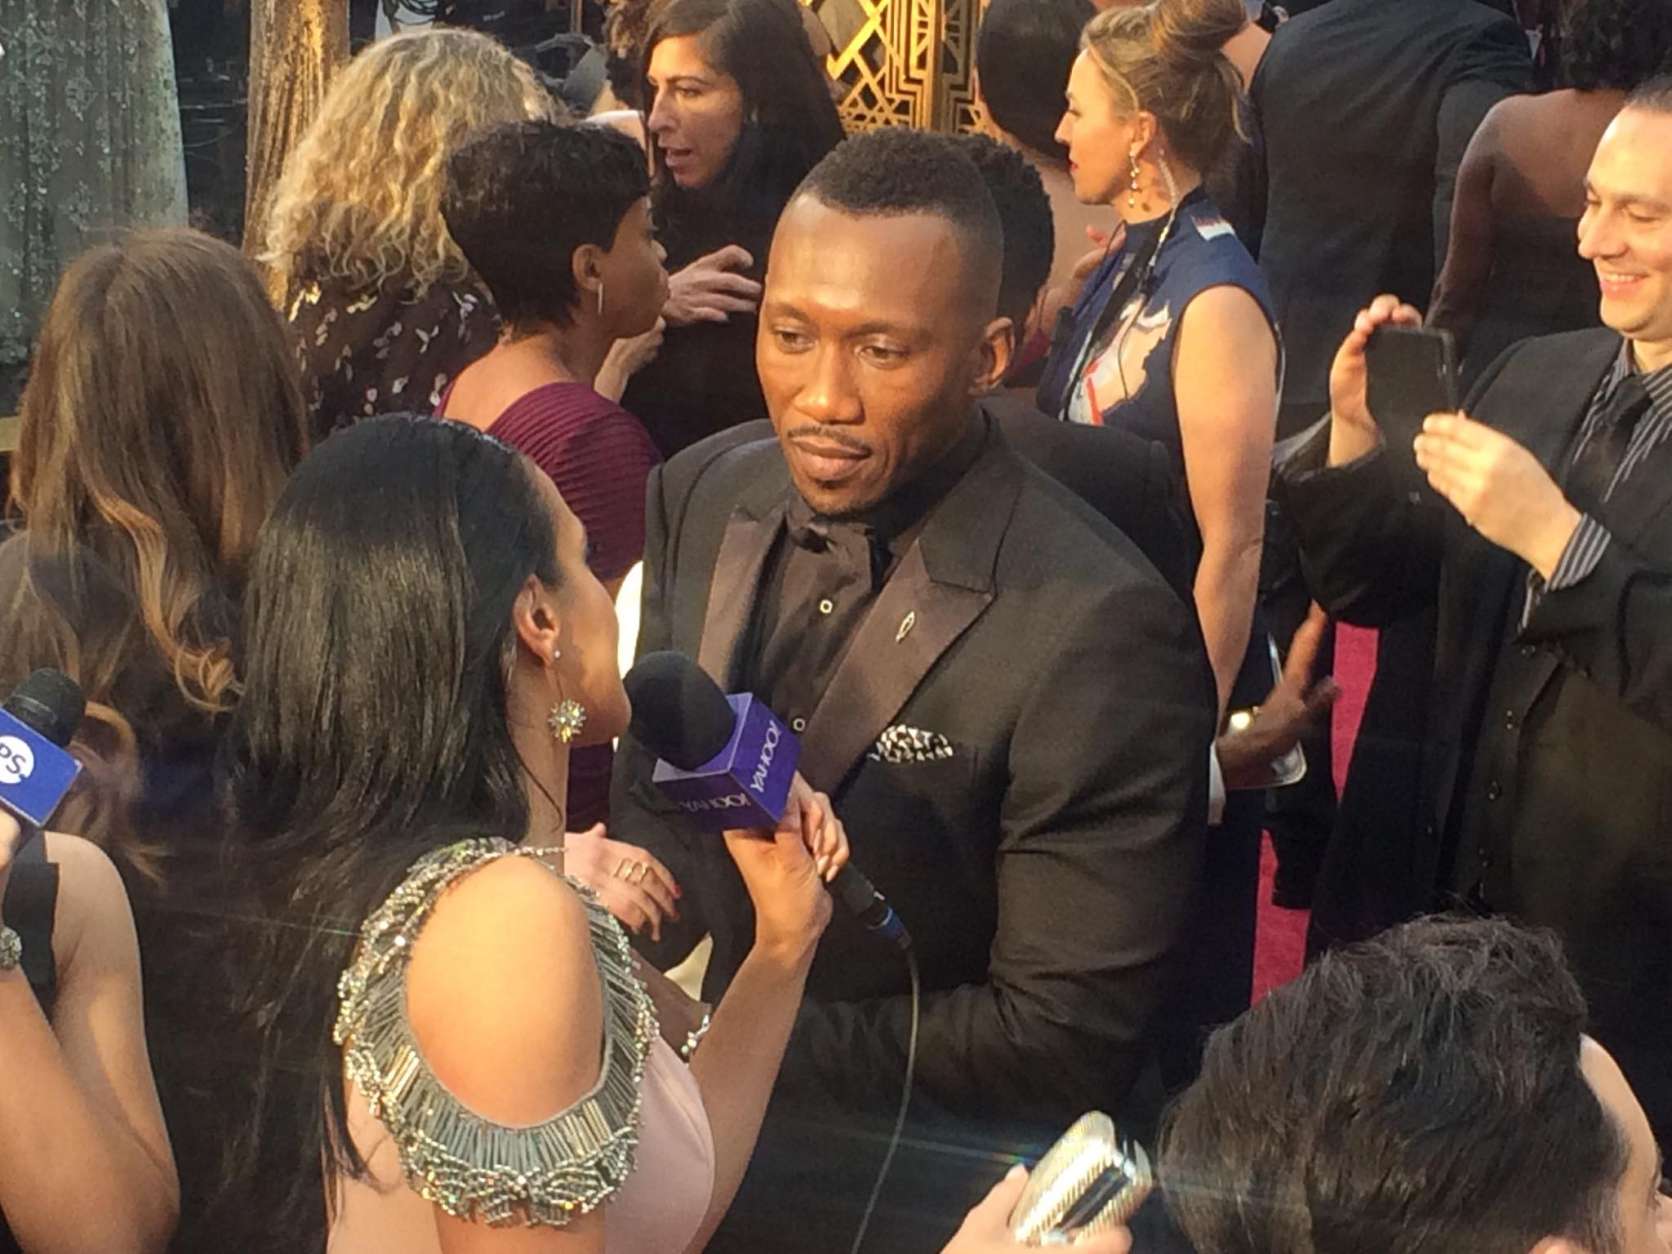 Mahershala Ali just moments before winning Best Supporting Actor. (WTOP/Jason Fraley)